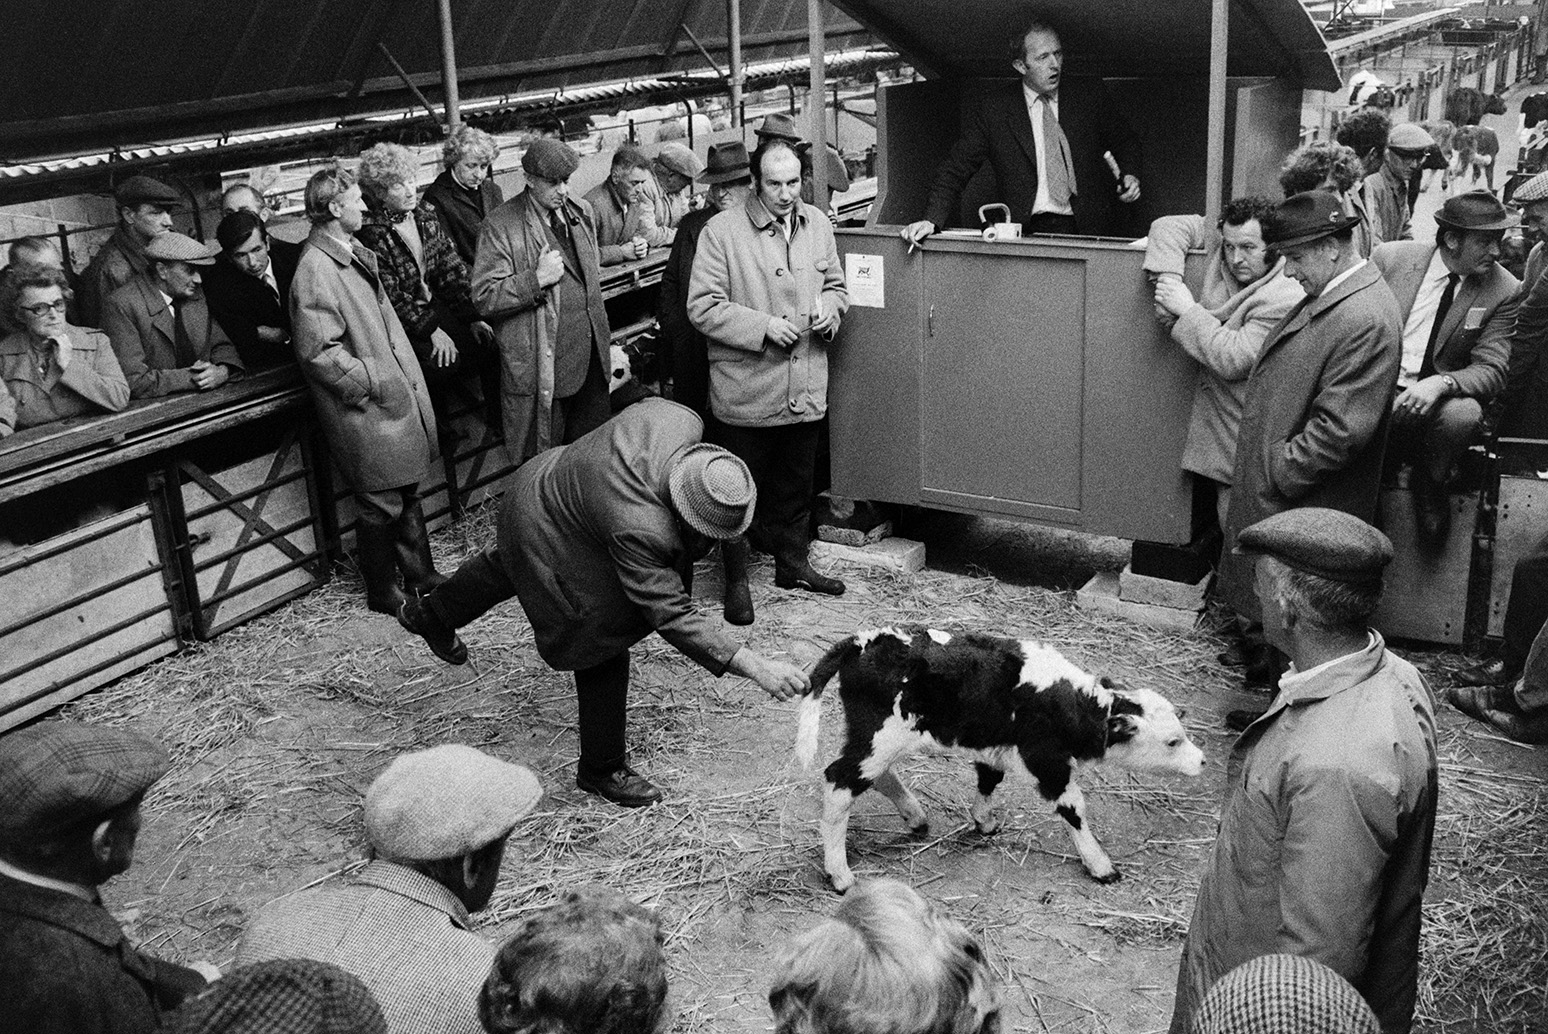 A calf being auctioned in a pen at Hatherleigh Market. Men are gathered around watching and the auctioneer is stood in a booth by the pen. The calf sold for £32.